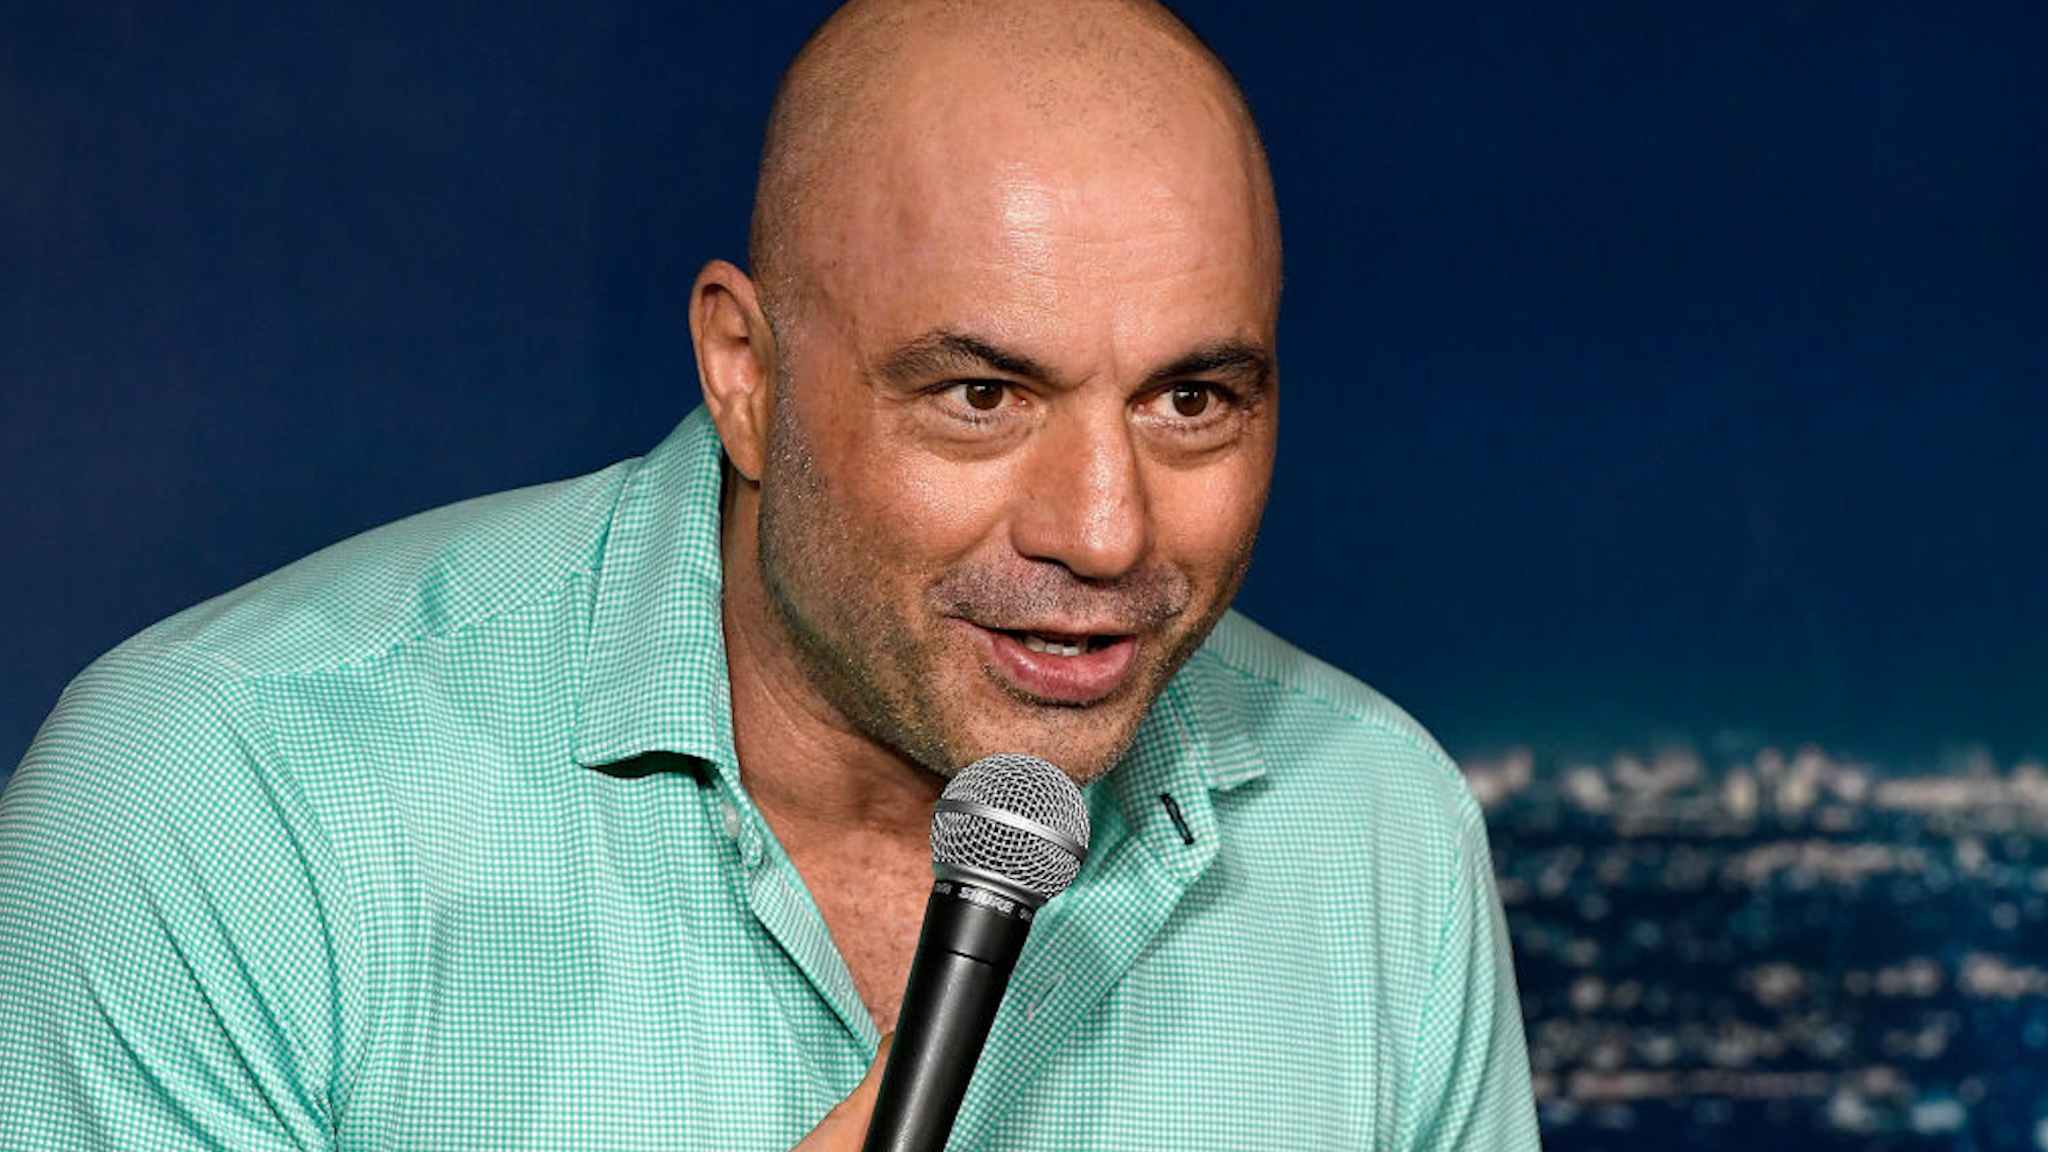 Comedian Joe Rogan performs during his appearance at The Ice House Comedy Club on March 15, 2019 in Pasadena, California.